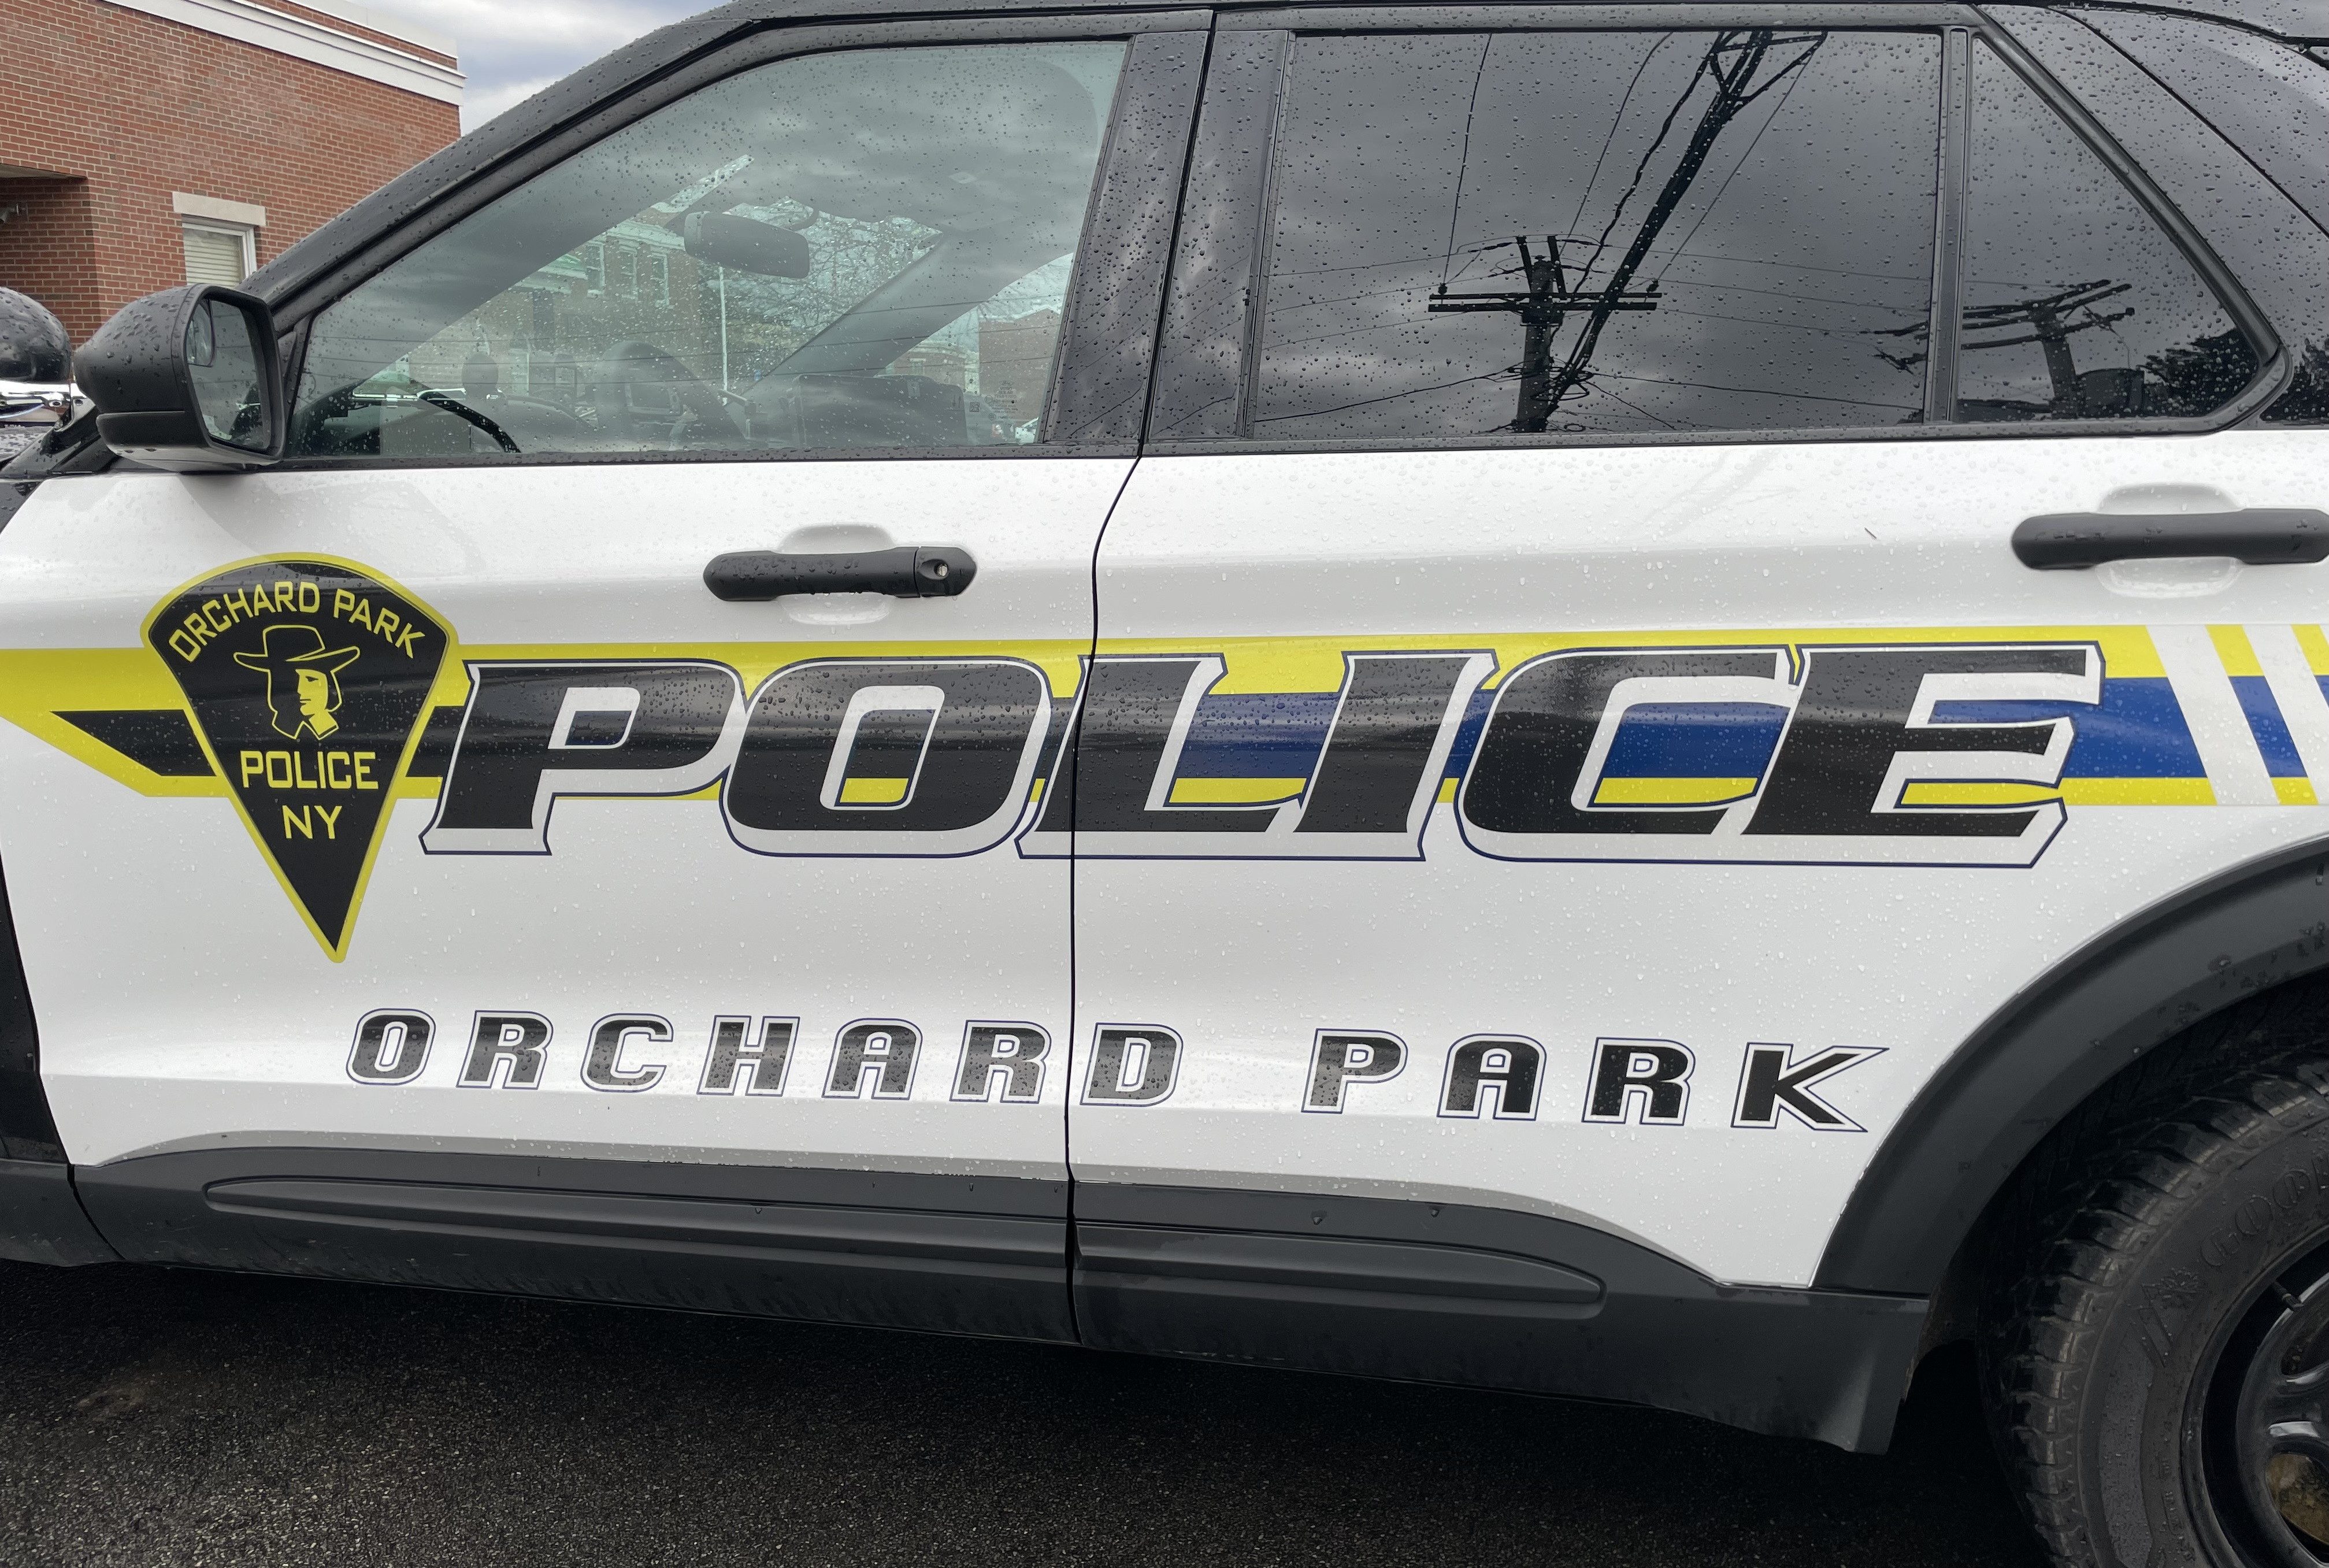 Orchard Park Police Chief Patrick Fitzgerald updates a weekend stabbing